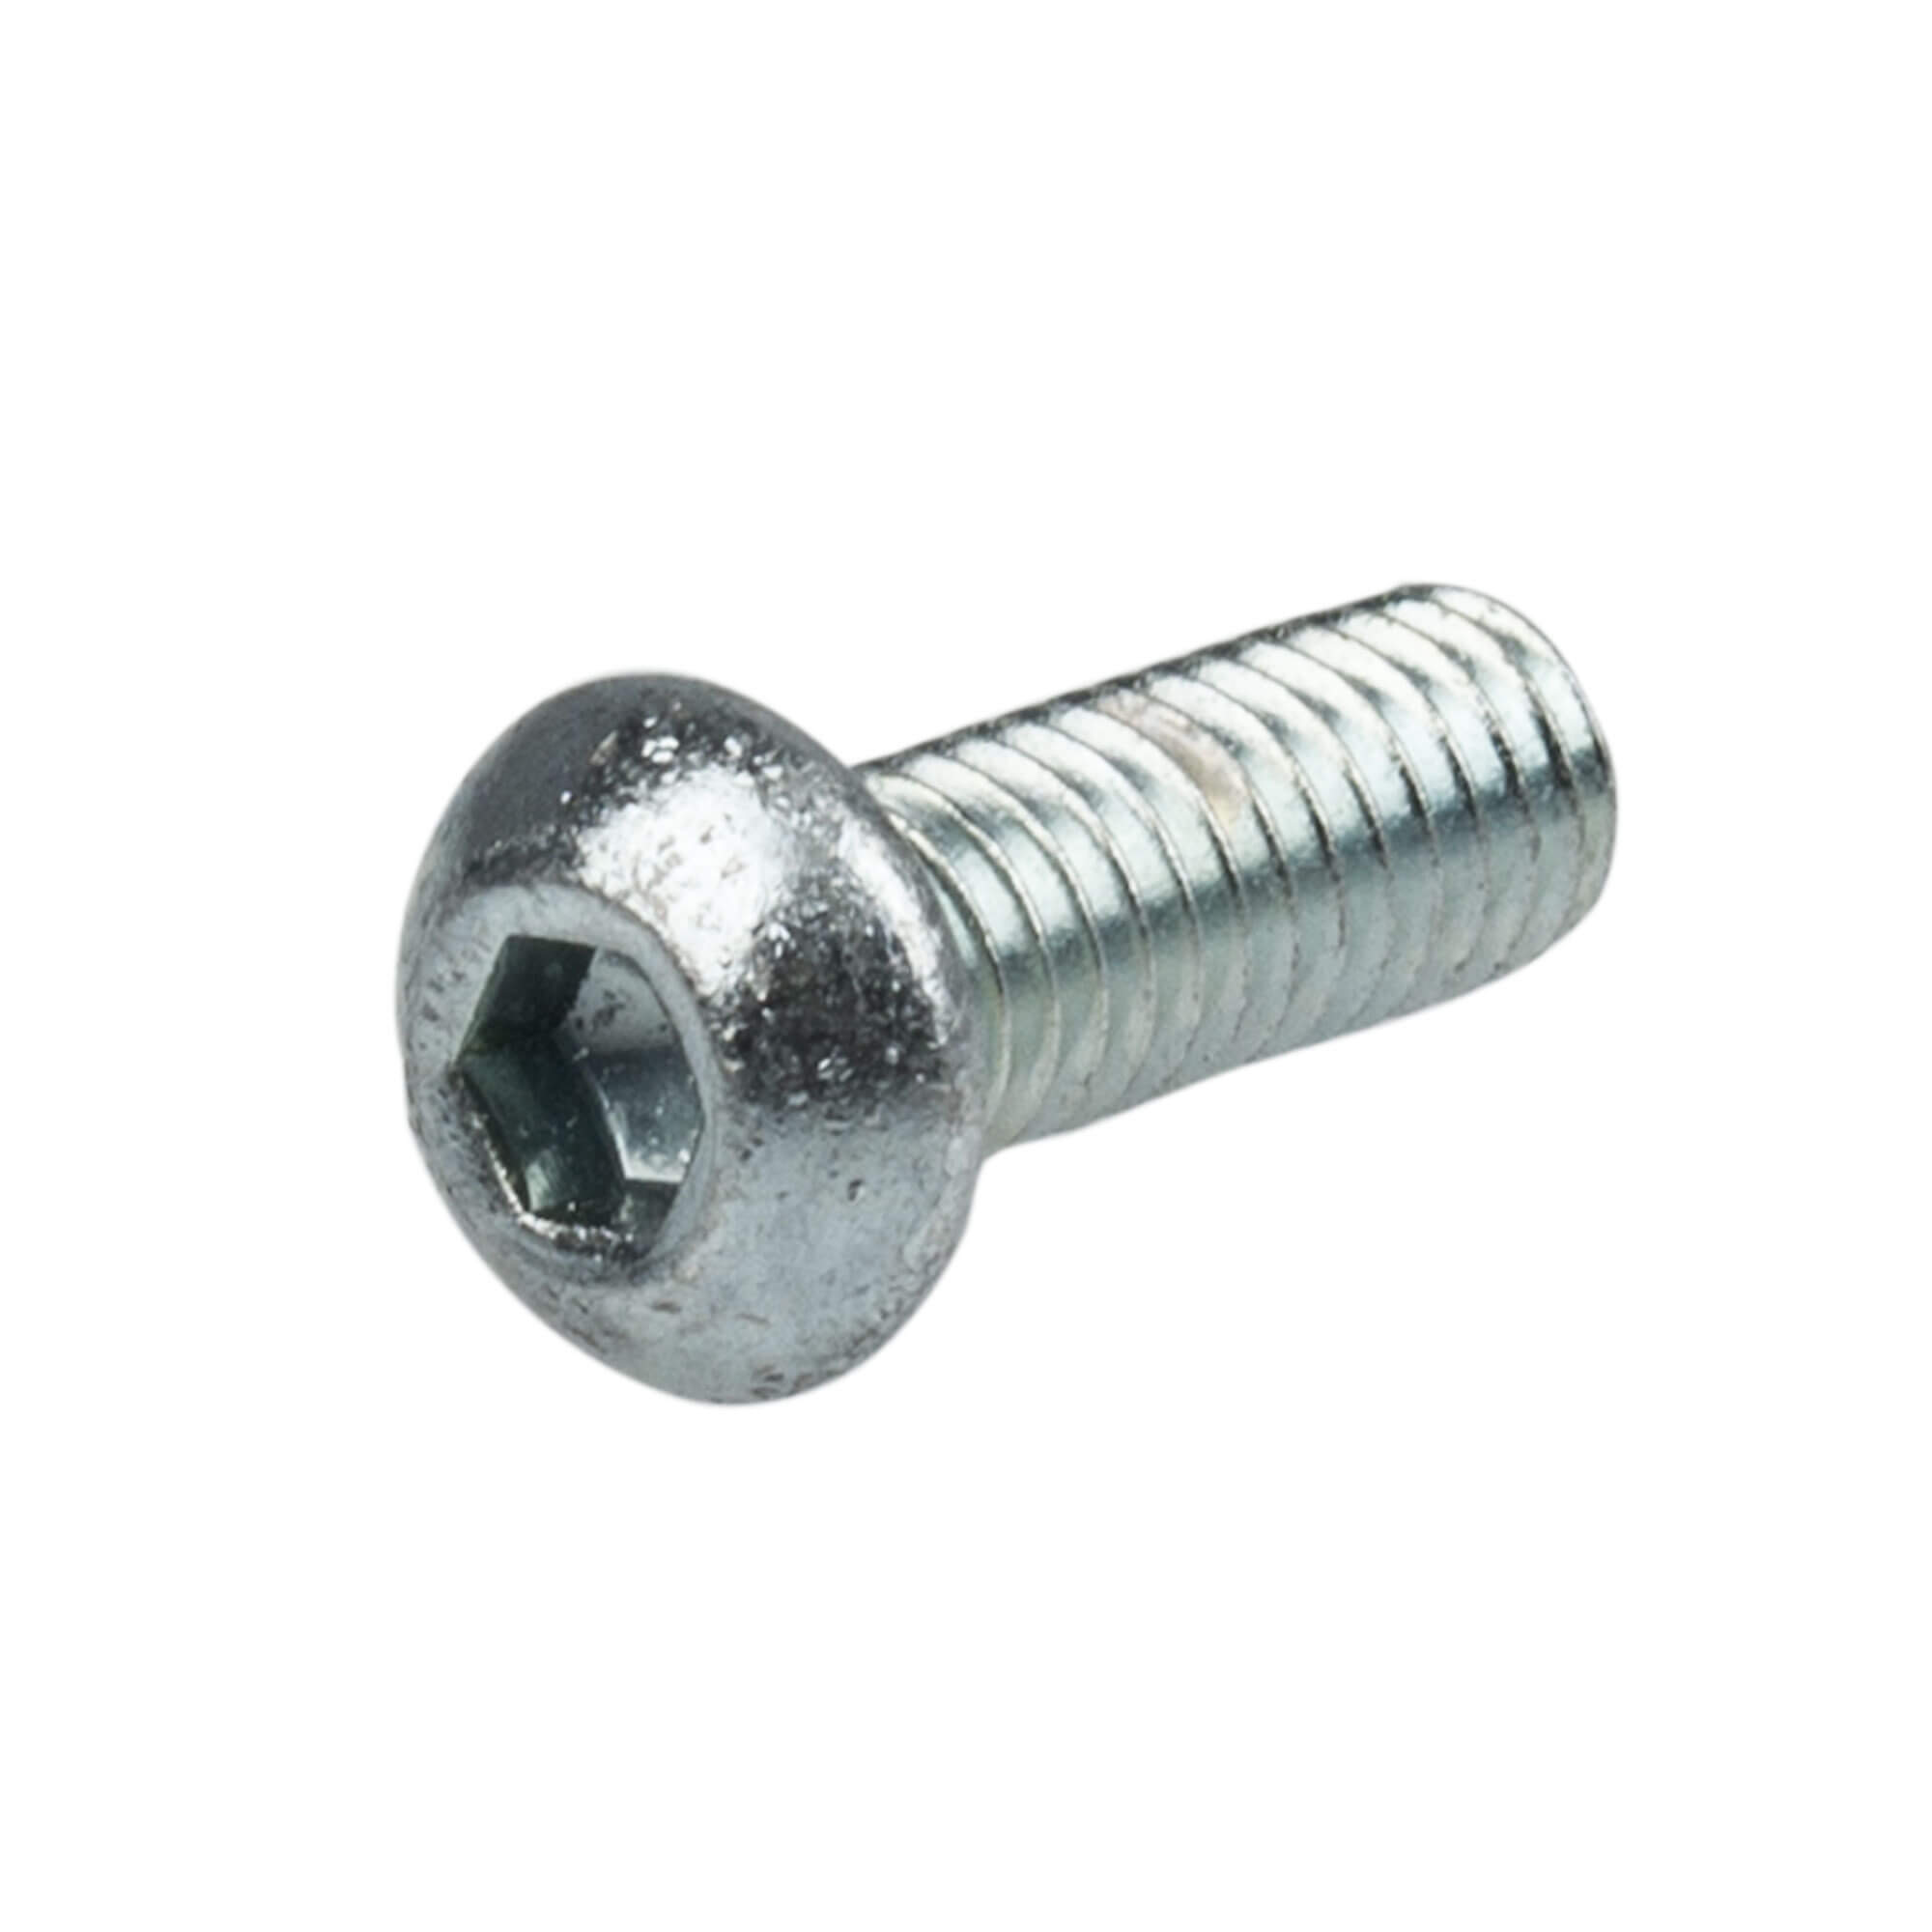 Inbus curved M6x16 bolt - spare part for Cancan manual juicer